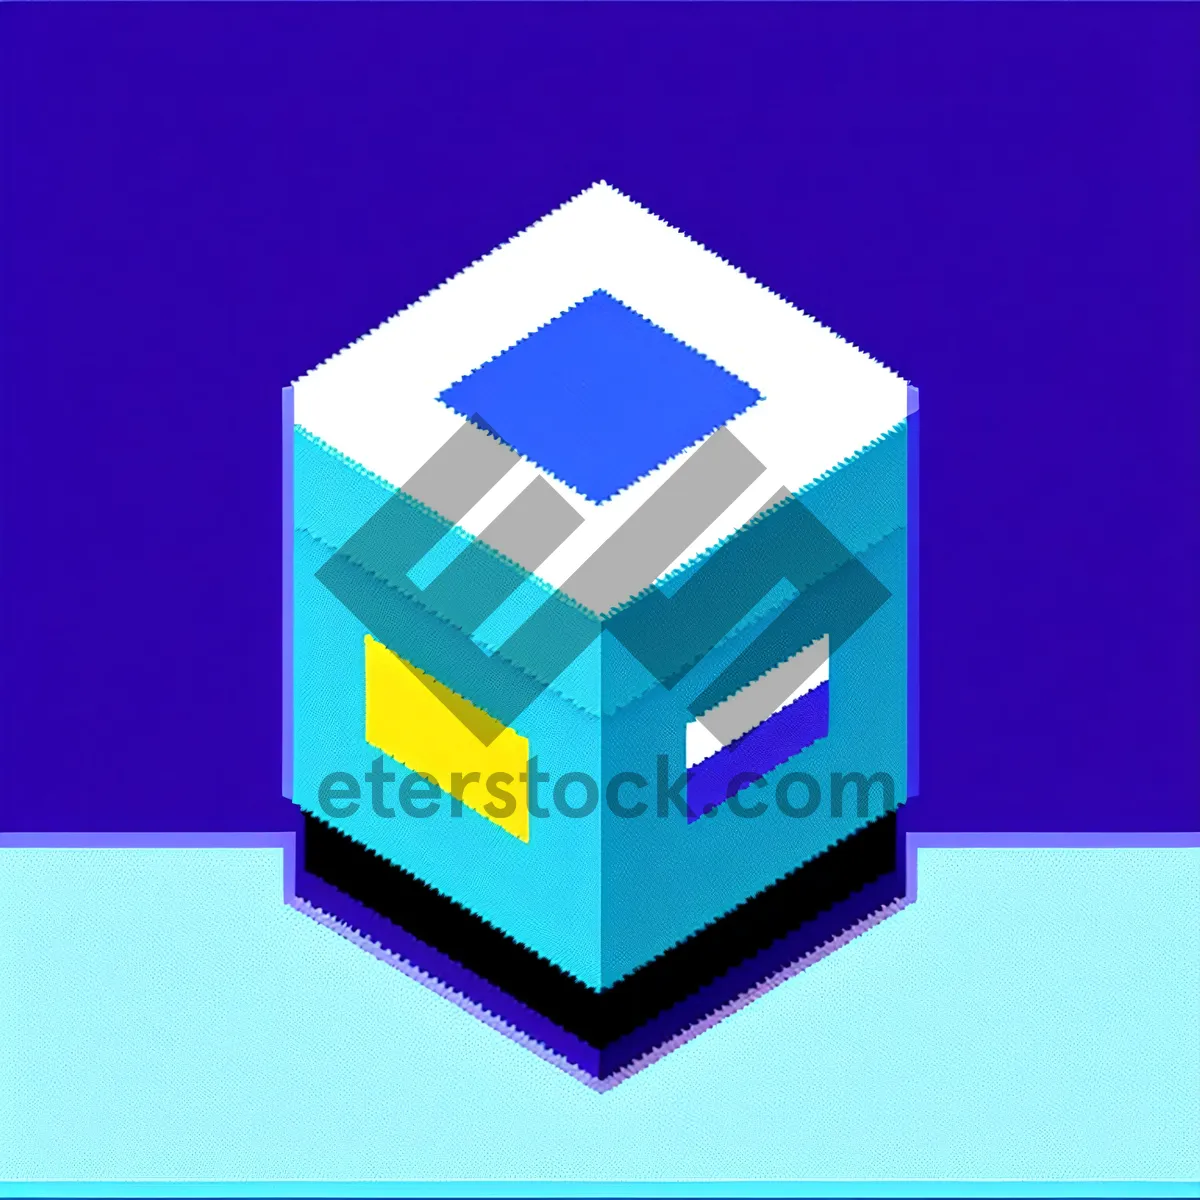 Picture of Bank Cube - Iconic 3D Business Symbol